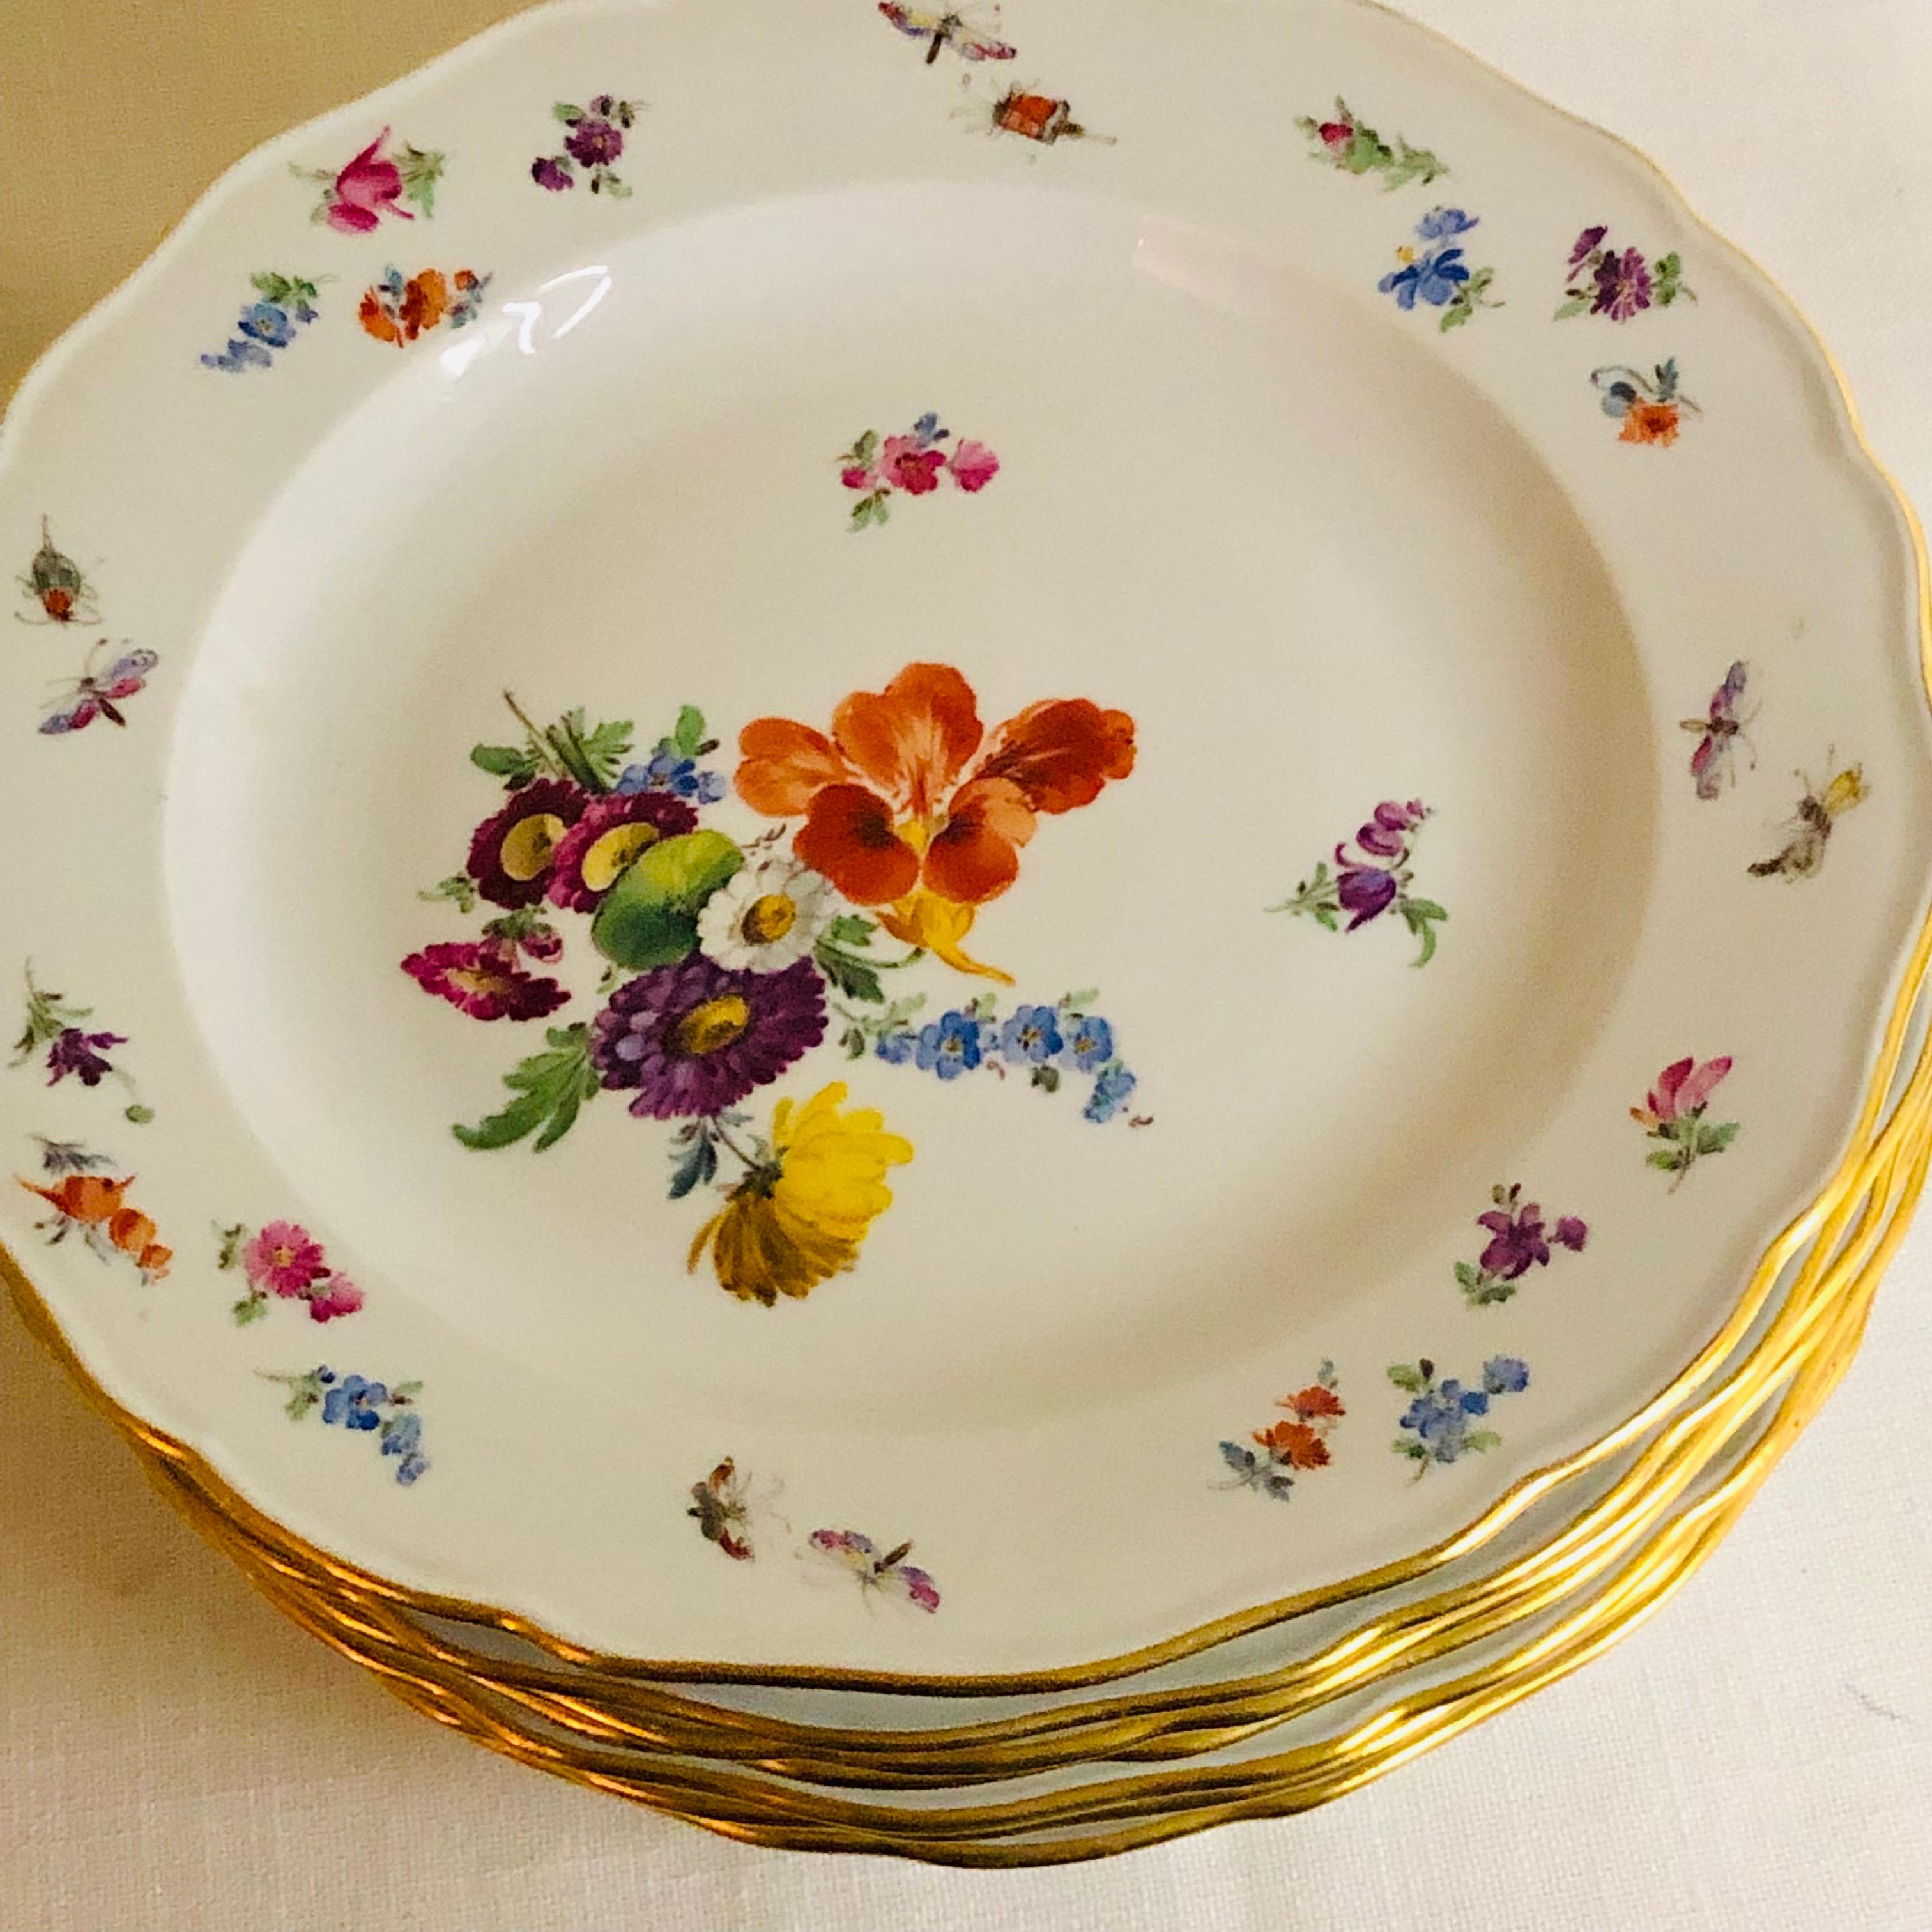 Set of 12 Meissen Dinner Plates Each Painted with a Different Bouquet of Flowers 1